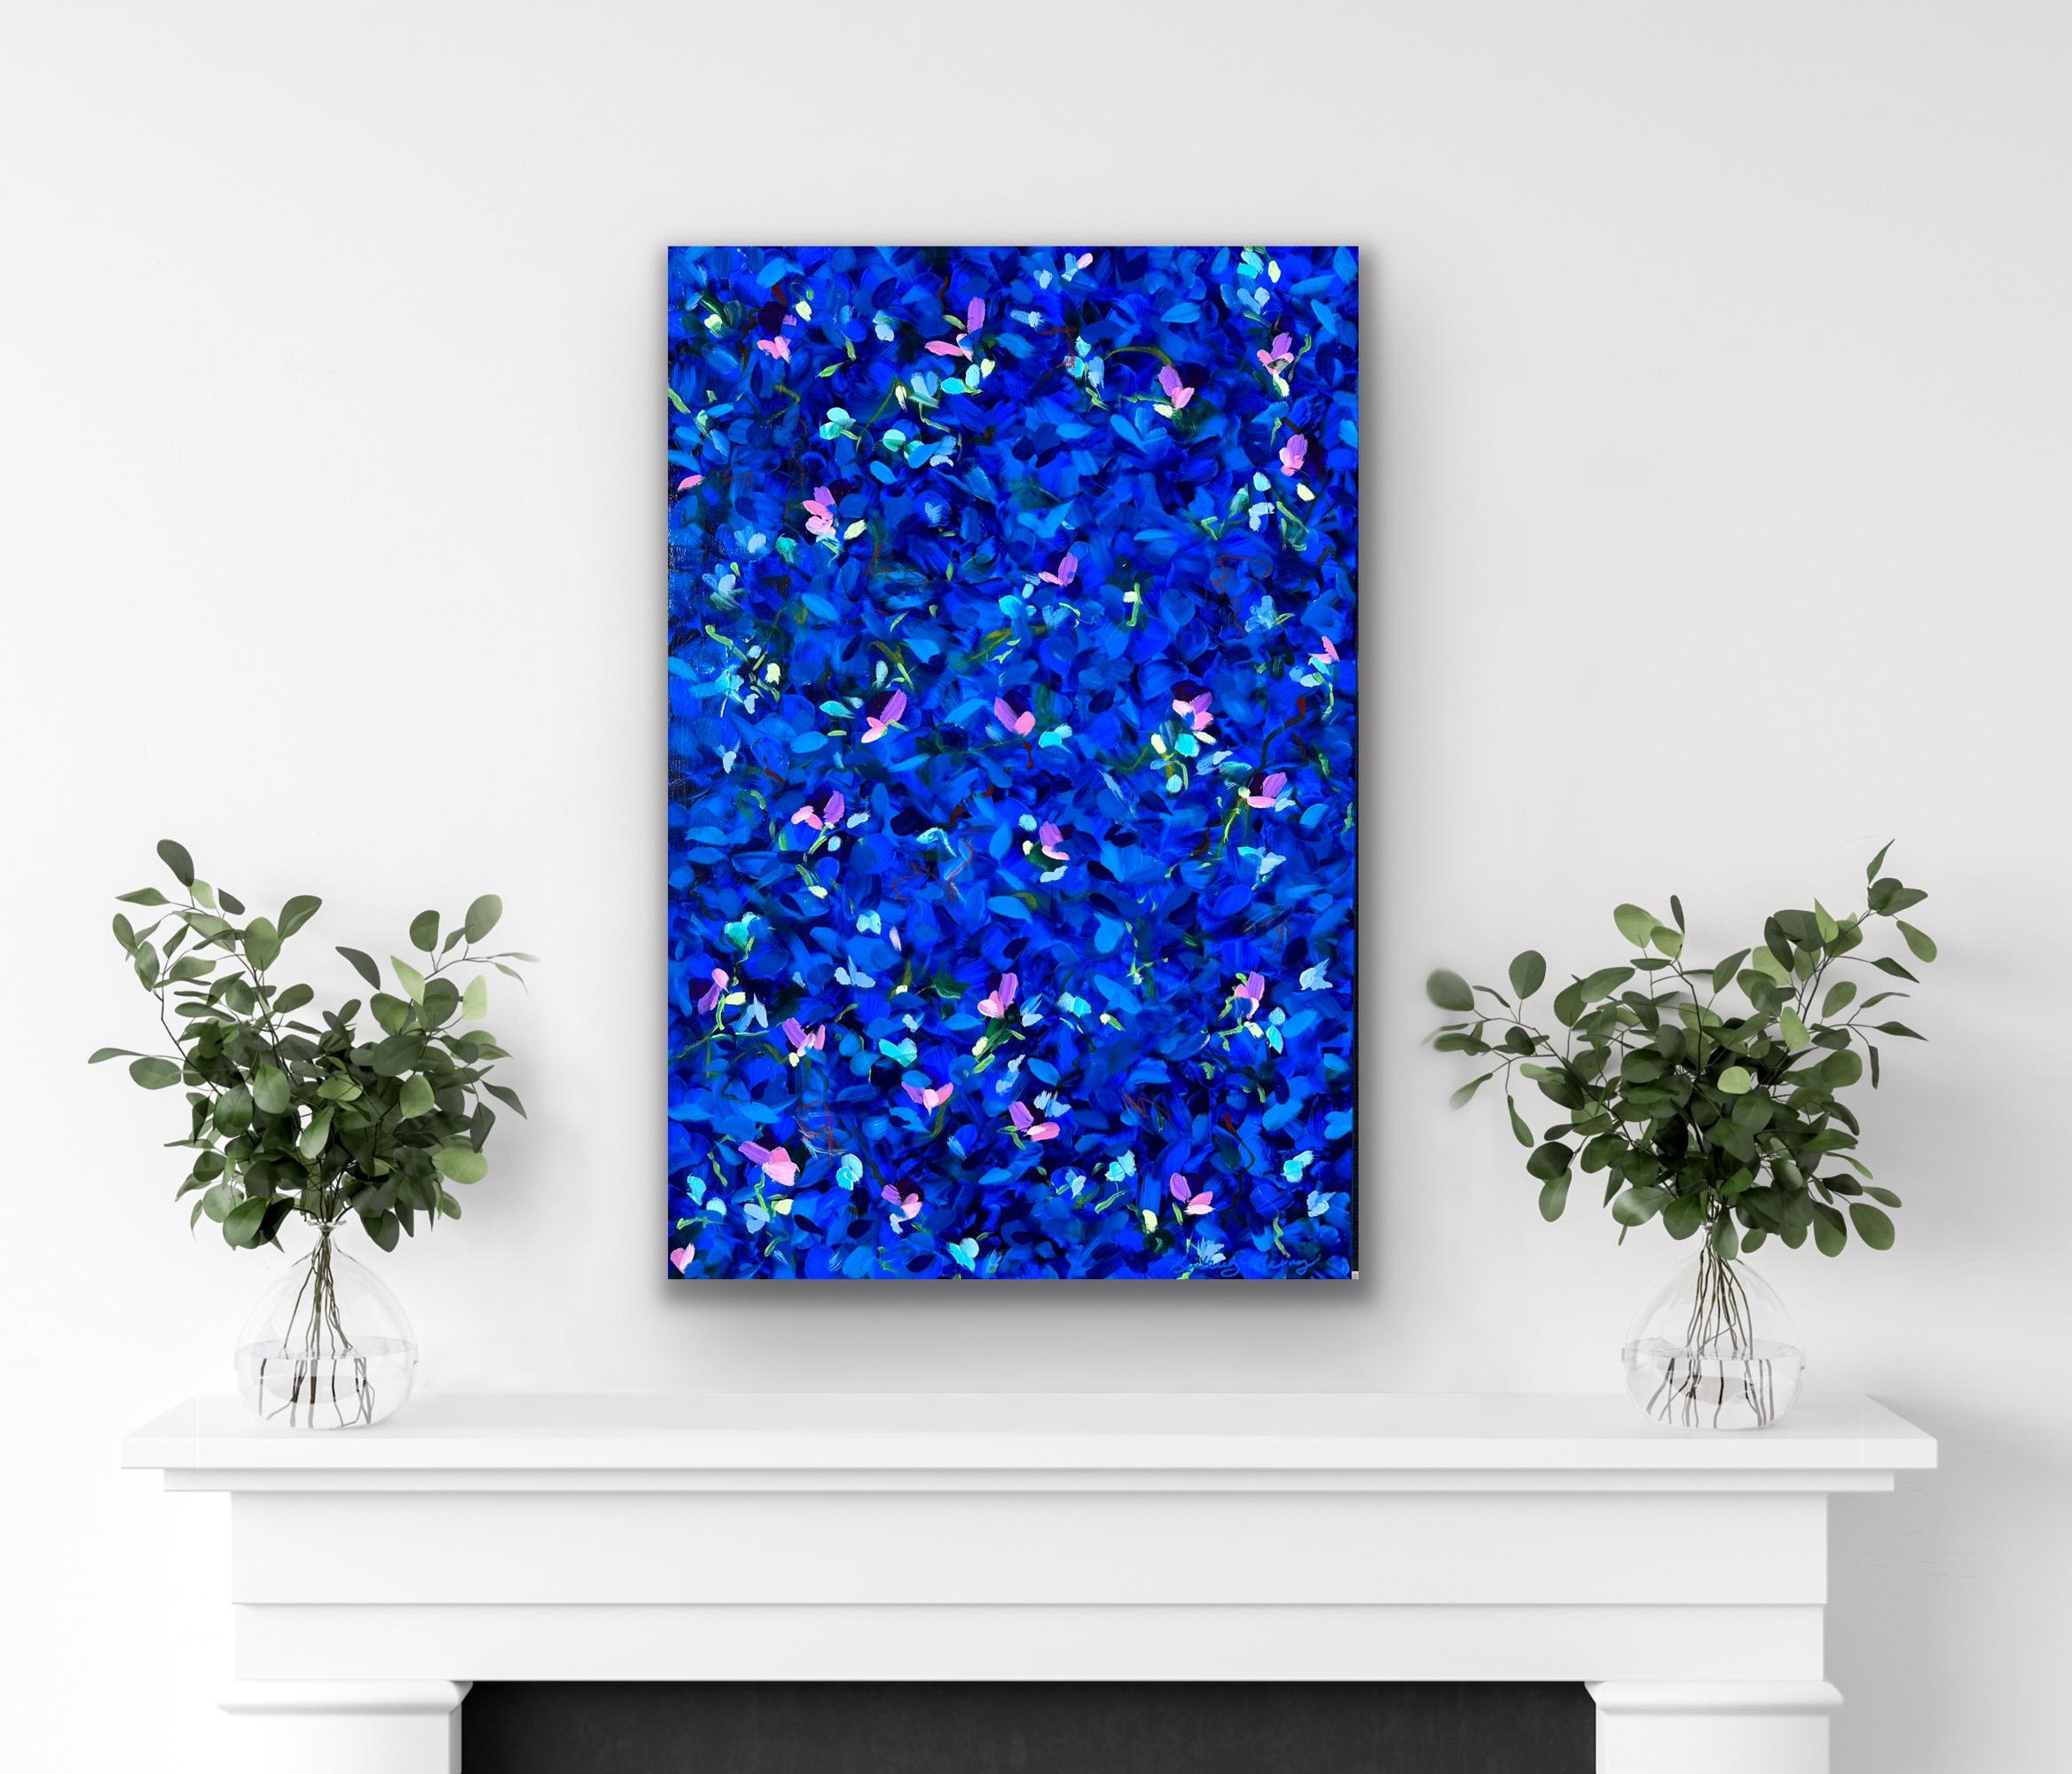 Kimberly Marney
Shimmers (Abstract, Landscape, Deep Blue, Pointillism)
2023
Acrylic on Canvas
Size: 36x24x1.5in
Signed by hand
COA provided
Ref.: 924802-2000

Tags: Abstract, Landscape, Deep Blue, Pointillism

Abstracted landscape featuring deep